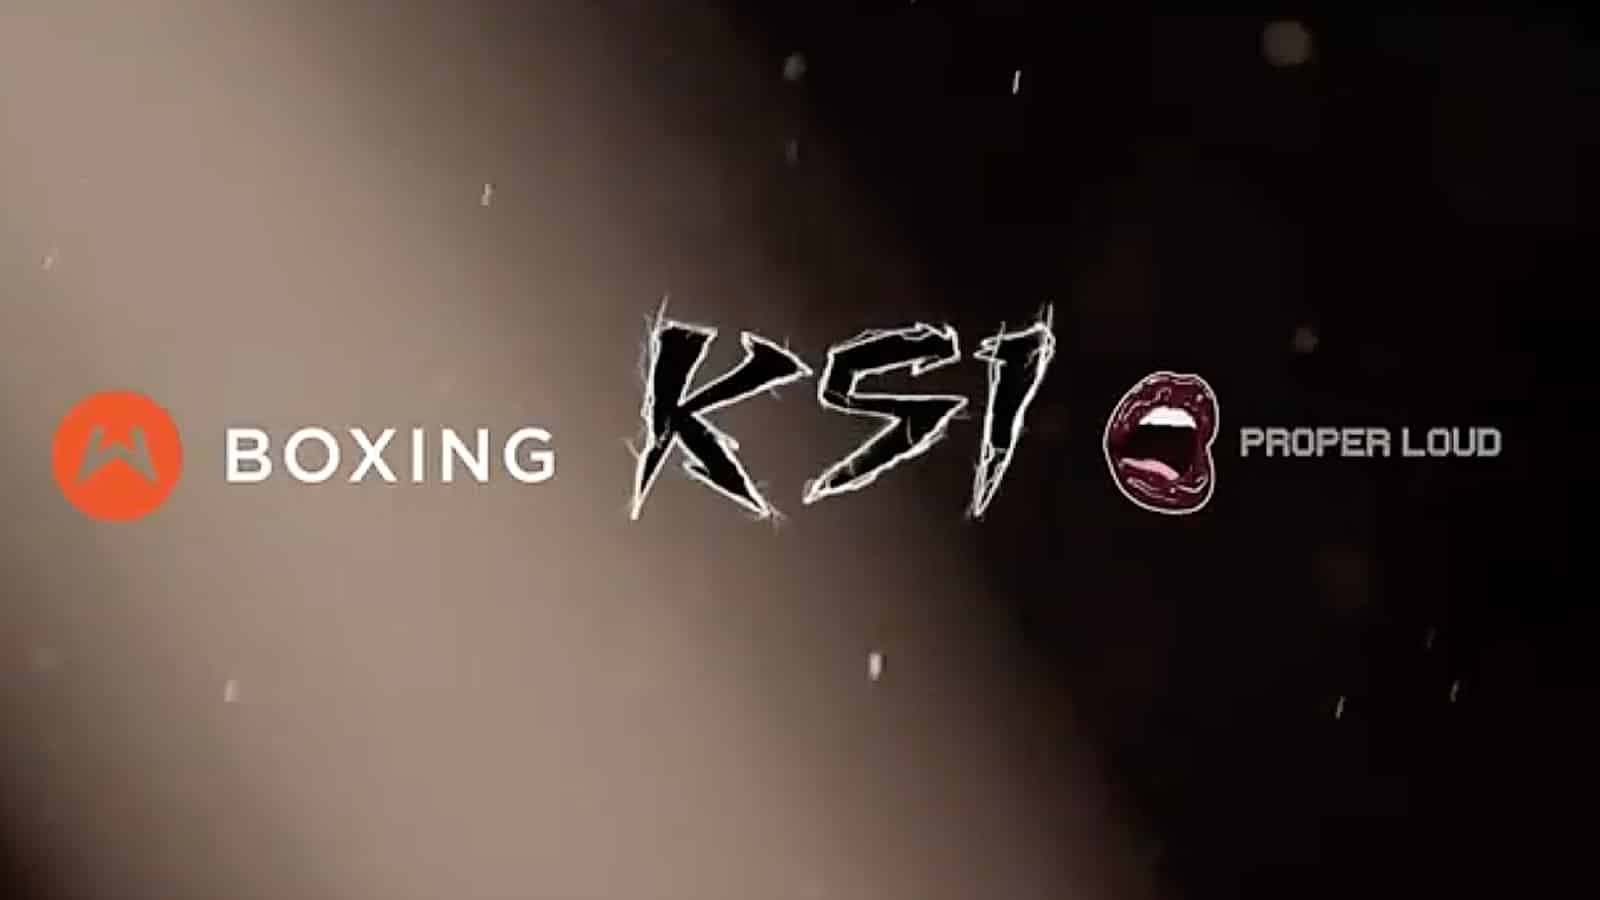 KSI launches boxing promotion with Proper Loud and Wasserman Boxing